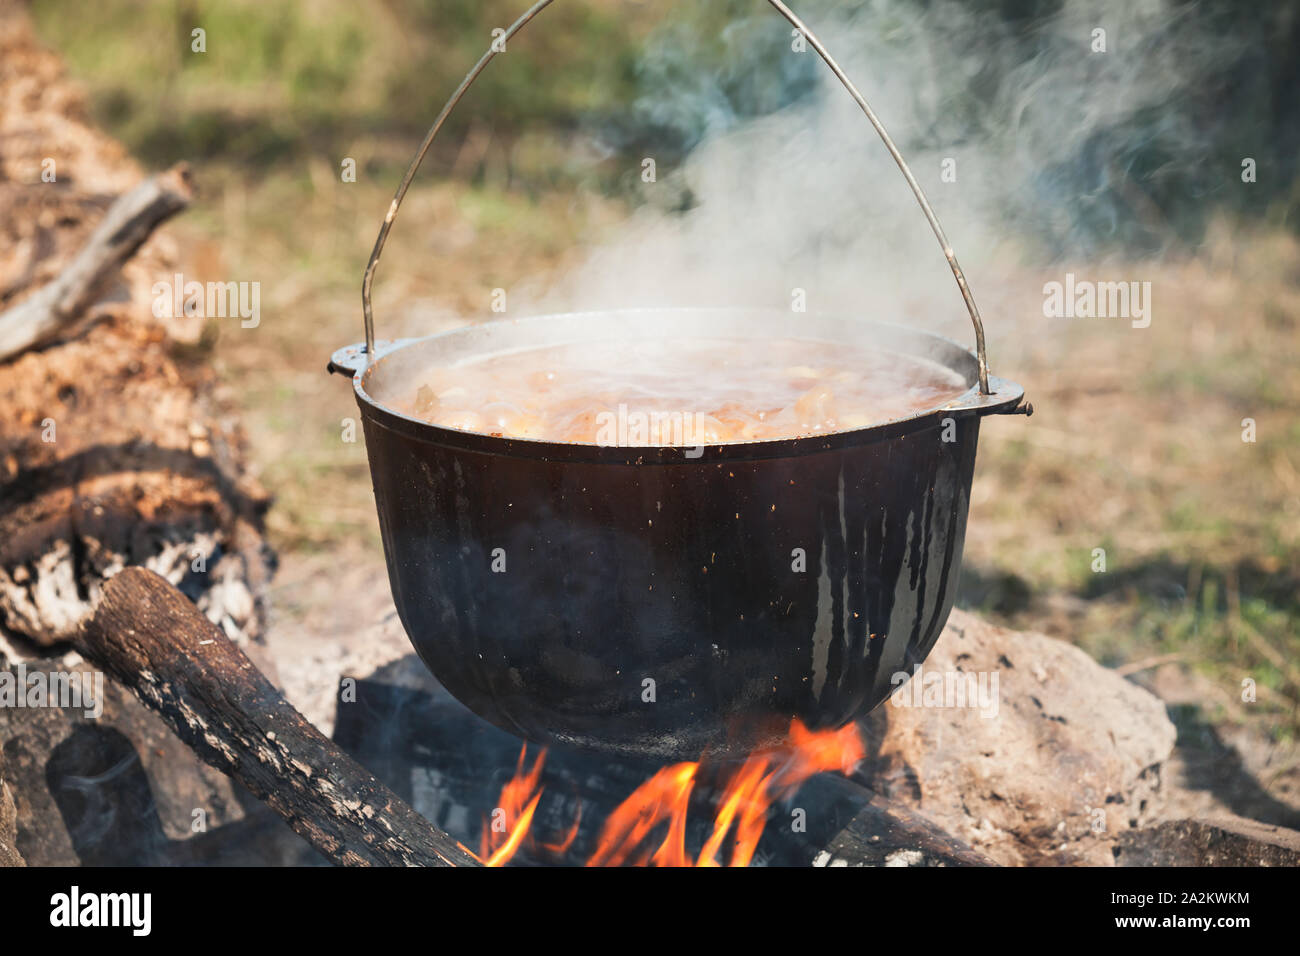 Cooking a soup with vegetables in a cauldron on open fire, camping meal Stock Photo